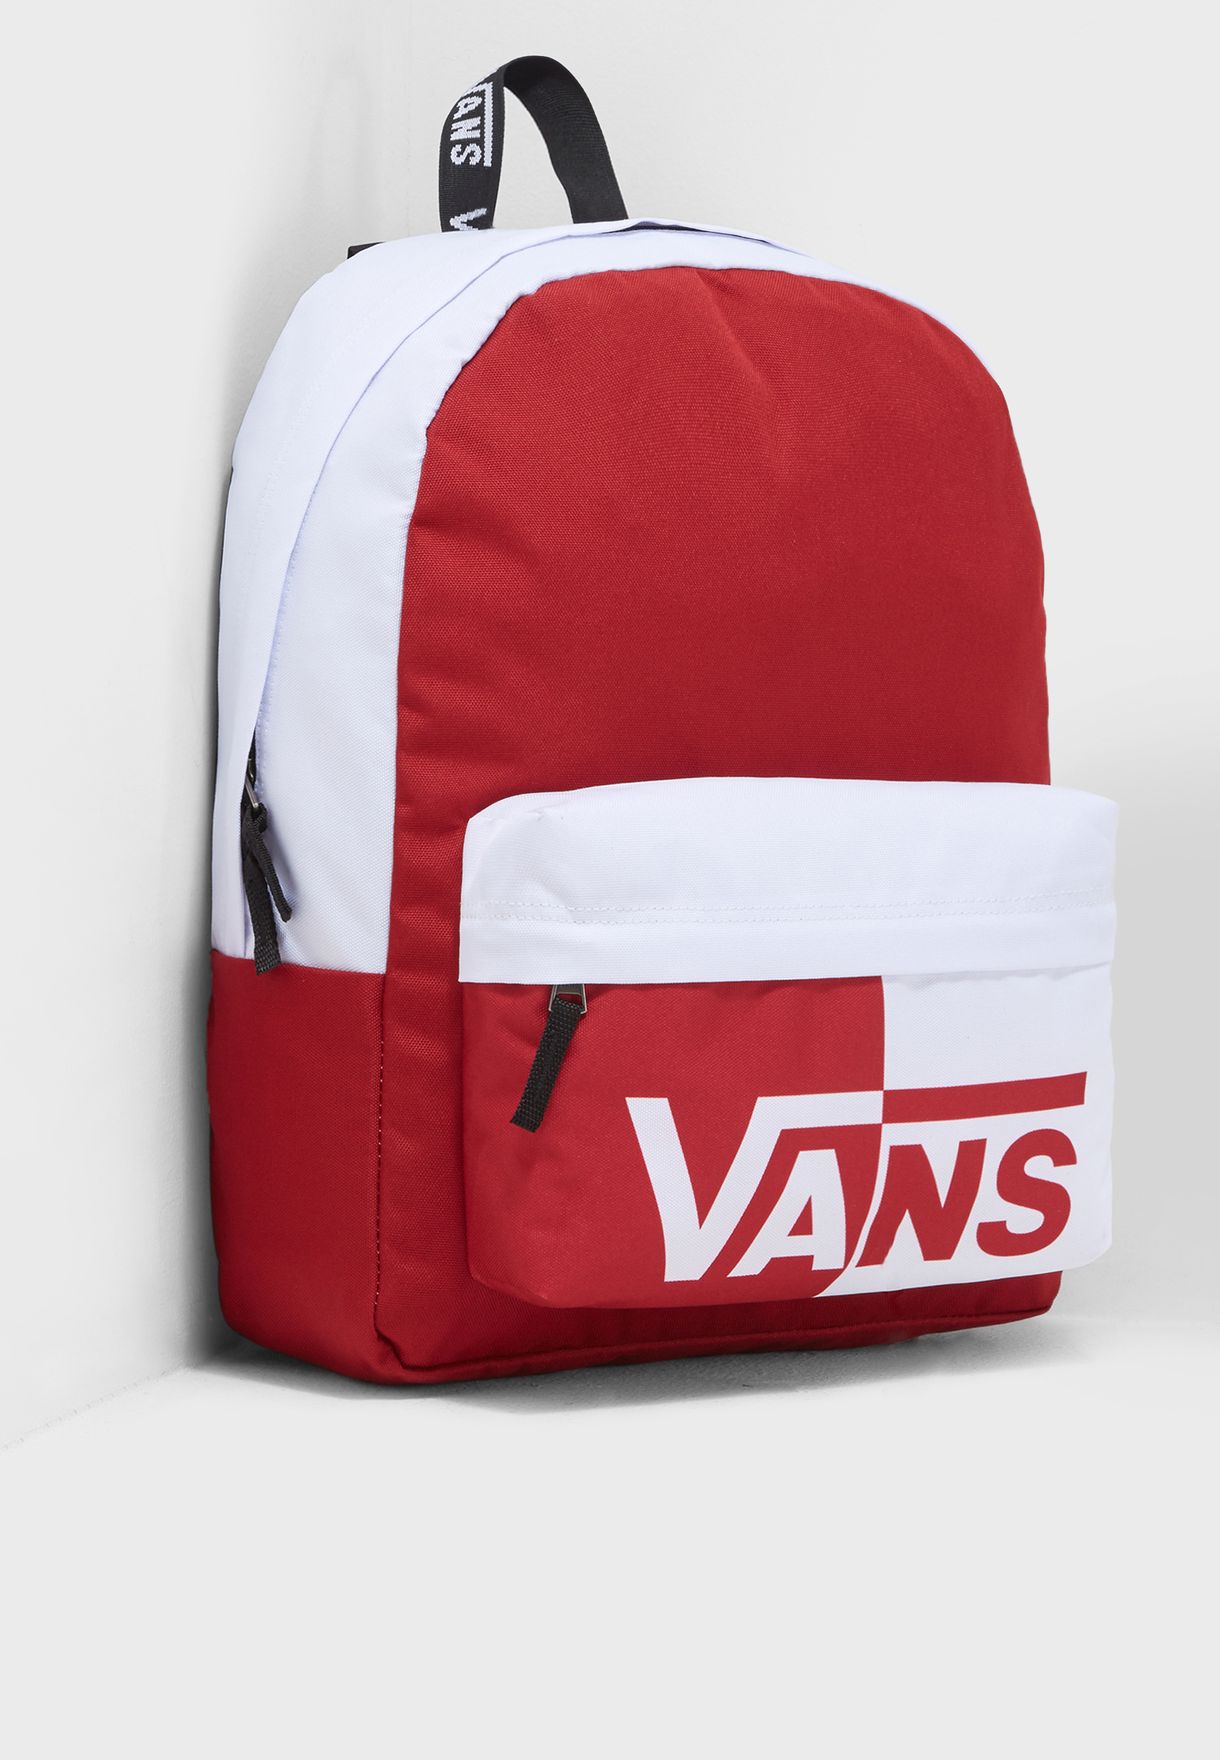 vans red and white backpack